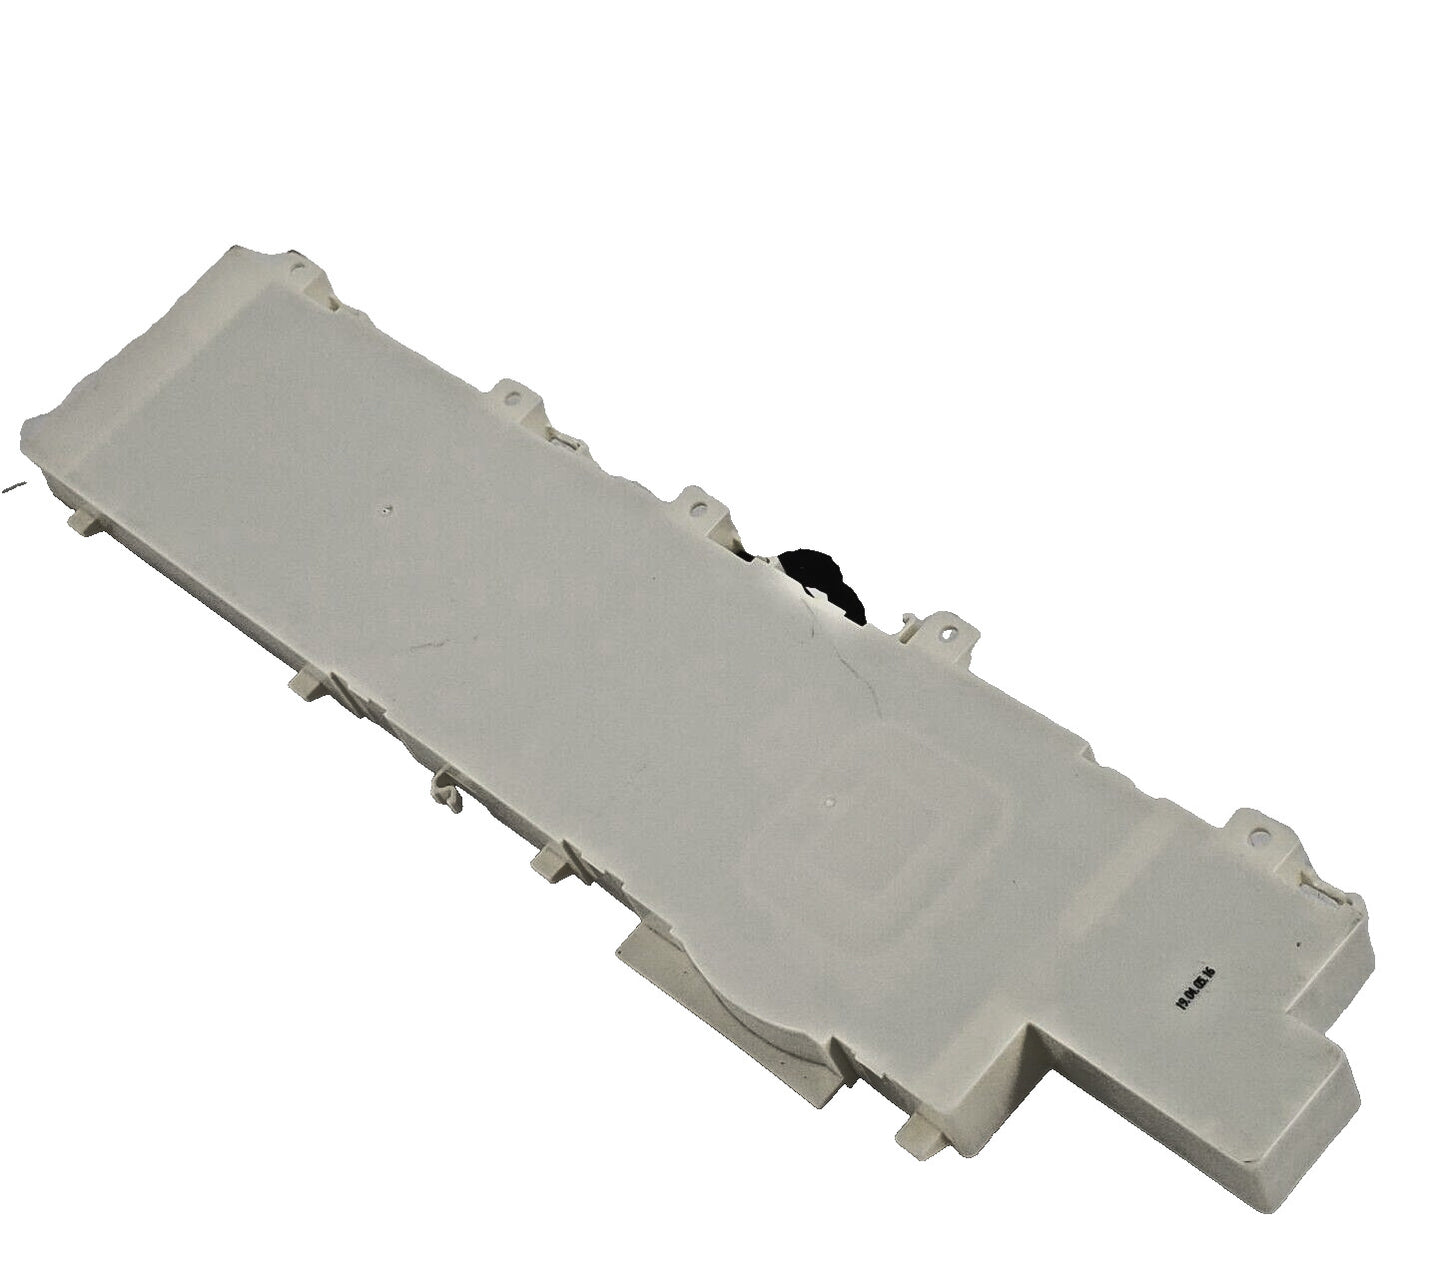 OEM Replacement for LG Dryer Display Control Board EBR86268003